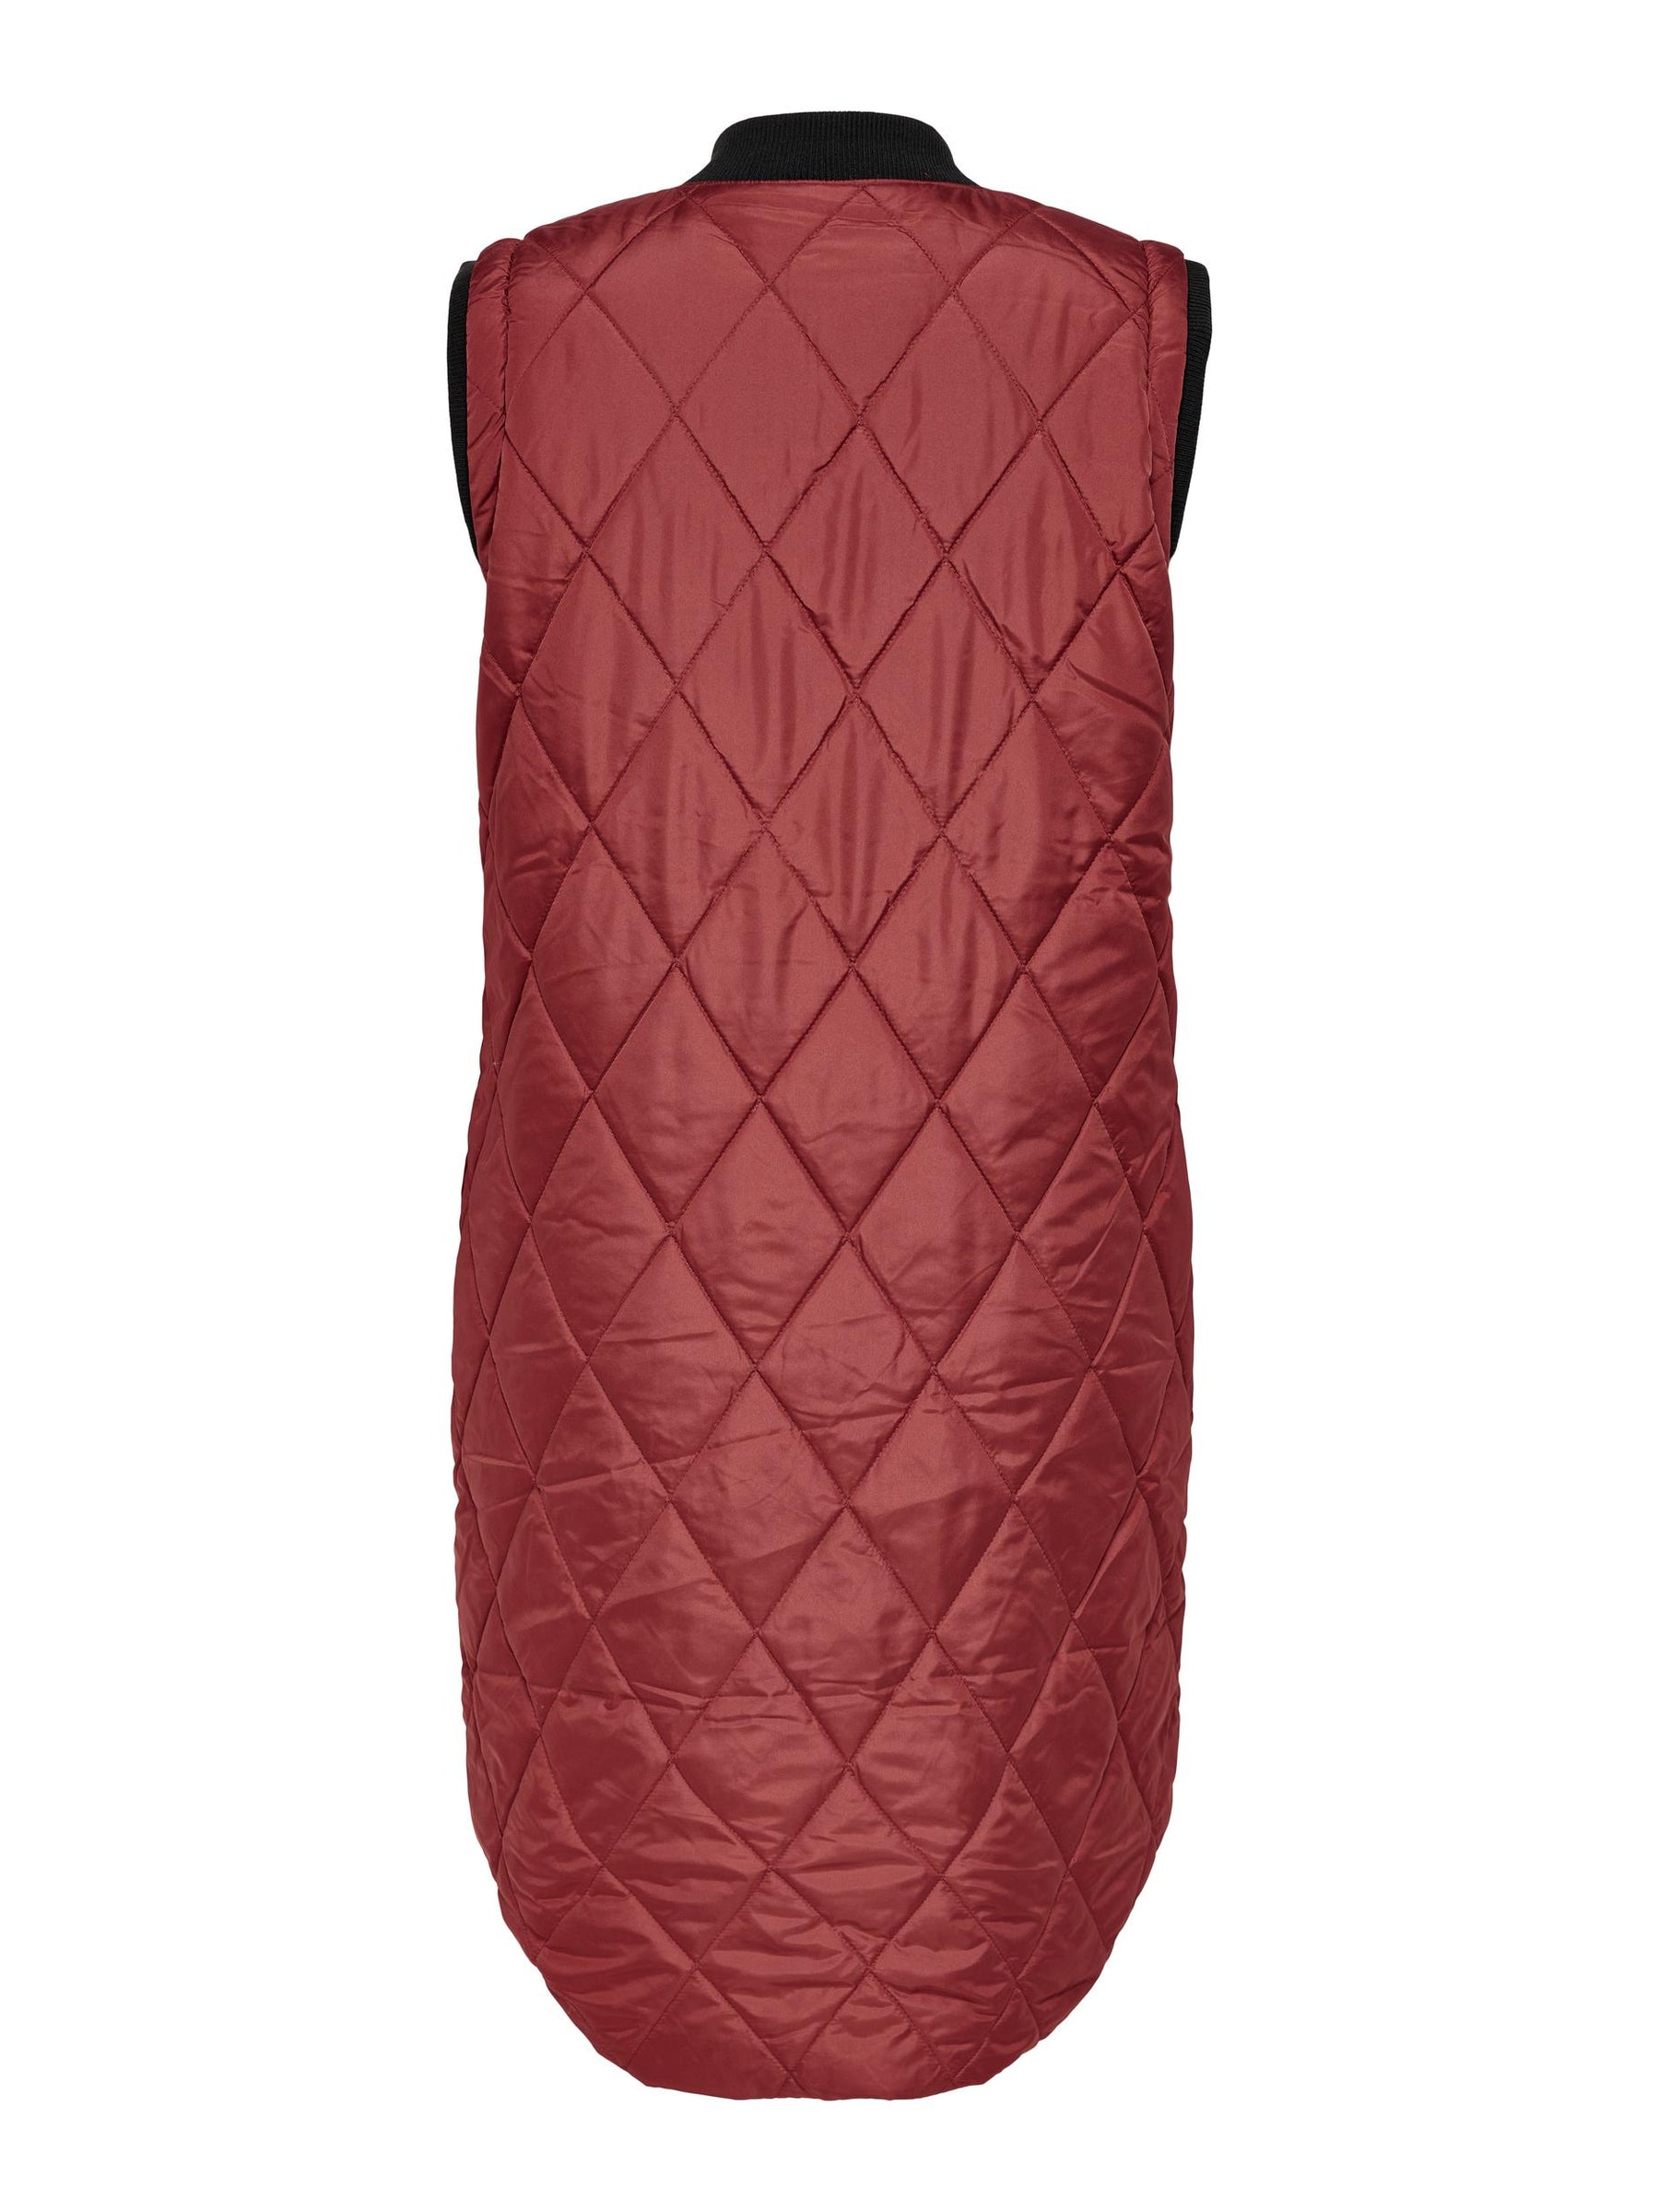 Only Carmakoma Longline Gilet in Spiced Apple